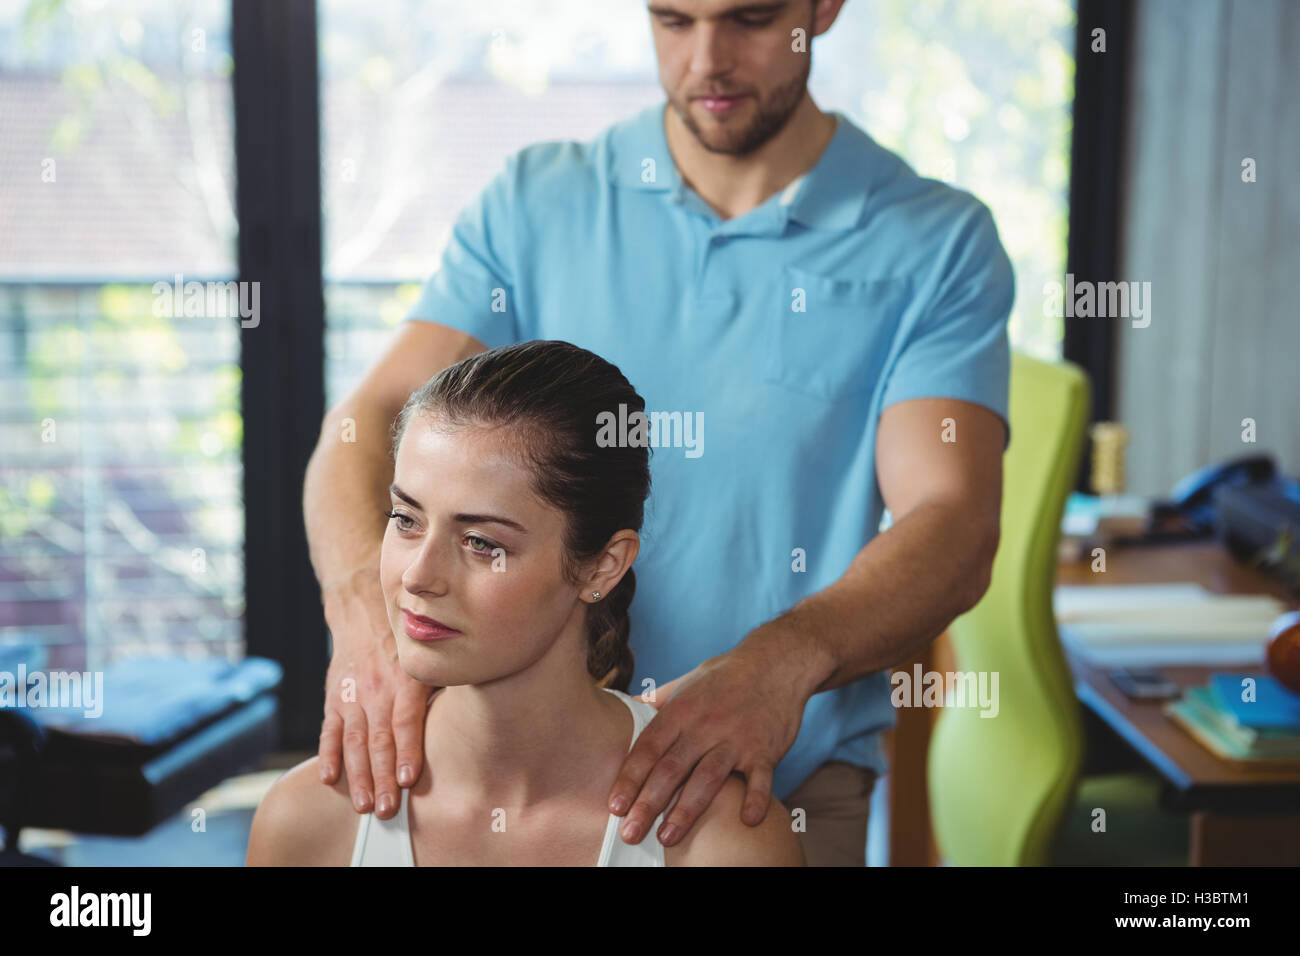 Physiotherapist massaging shoulder of a female patient Stock Photo